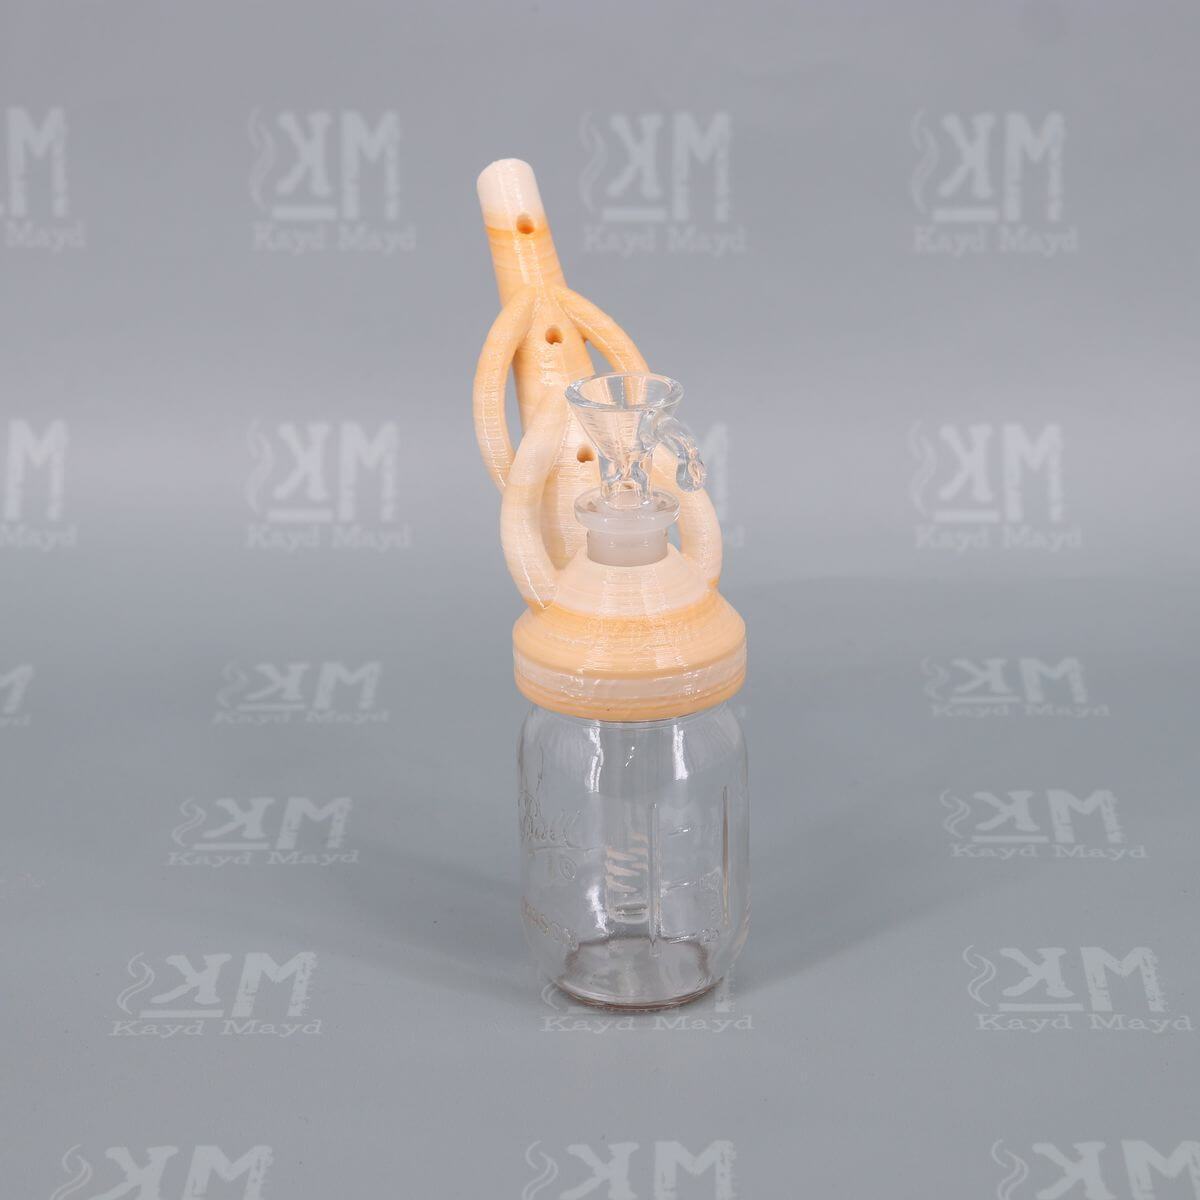 Creme de Orange color of Wee Billy Bubbler No. 2 - Amazing 3D Printed Water Pipe by Kayd Mayd